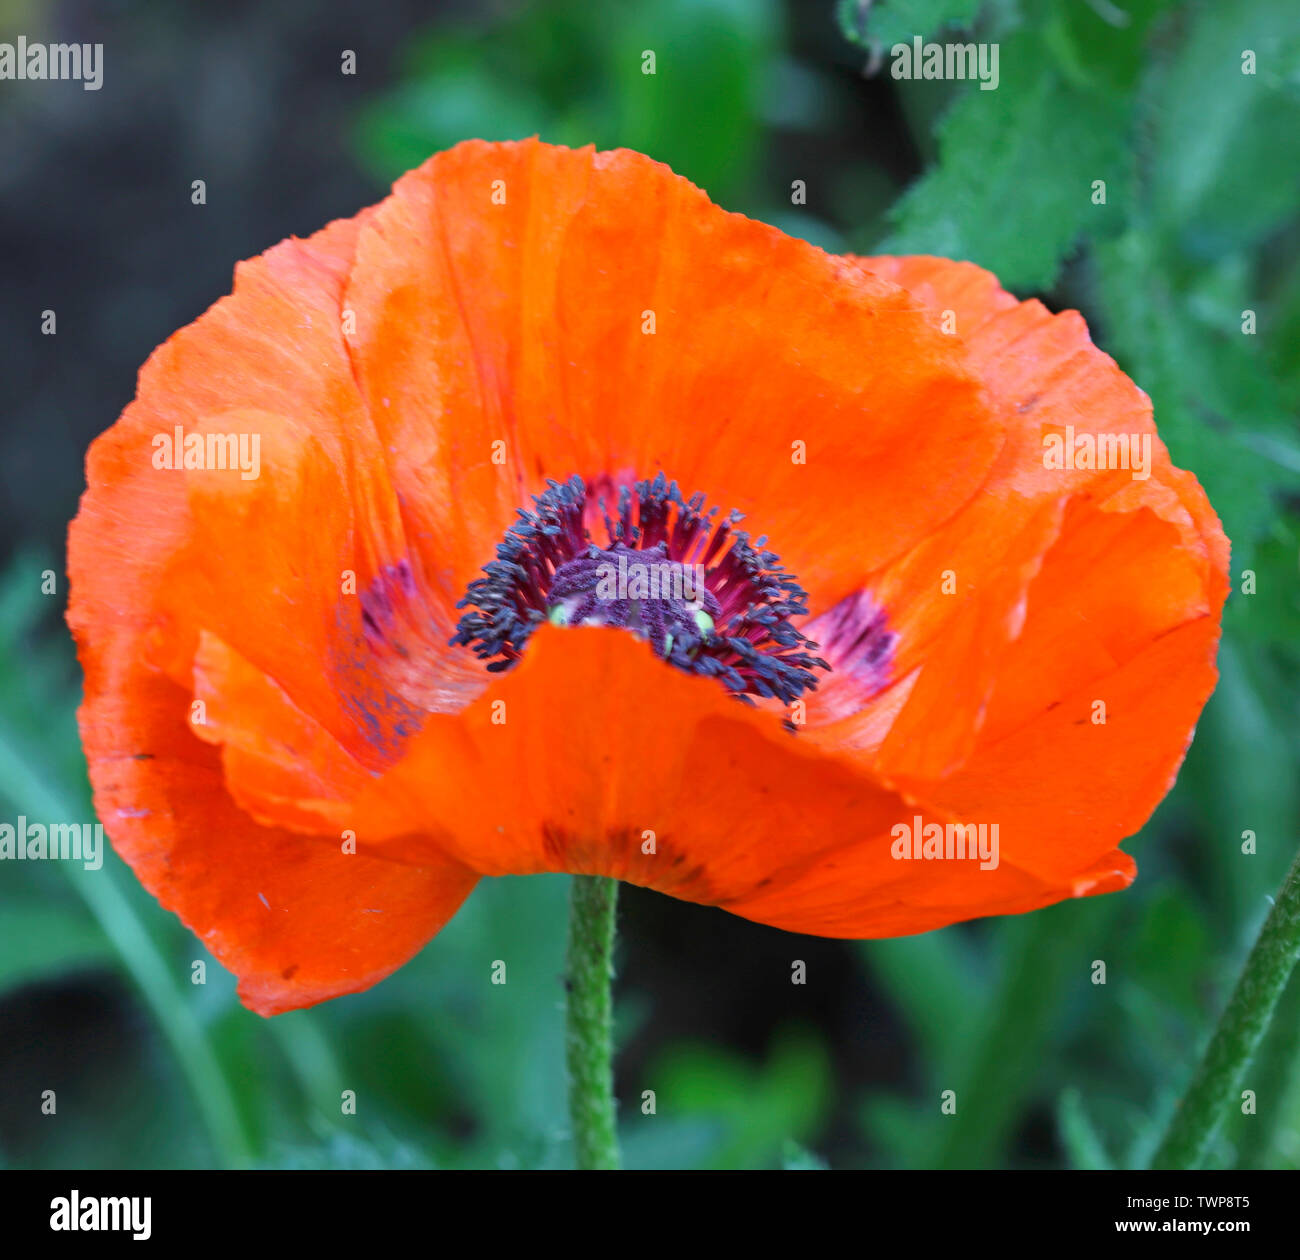 A view of a single red cultivated garden poppy flower from above in an English country garden border. Stock Photo